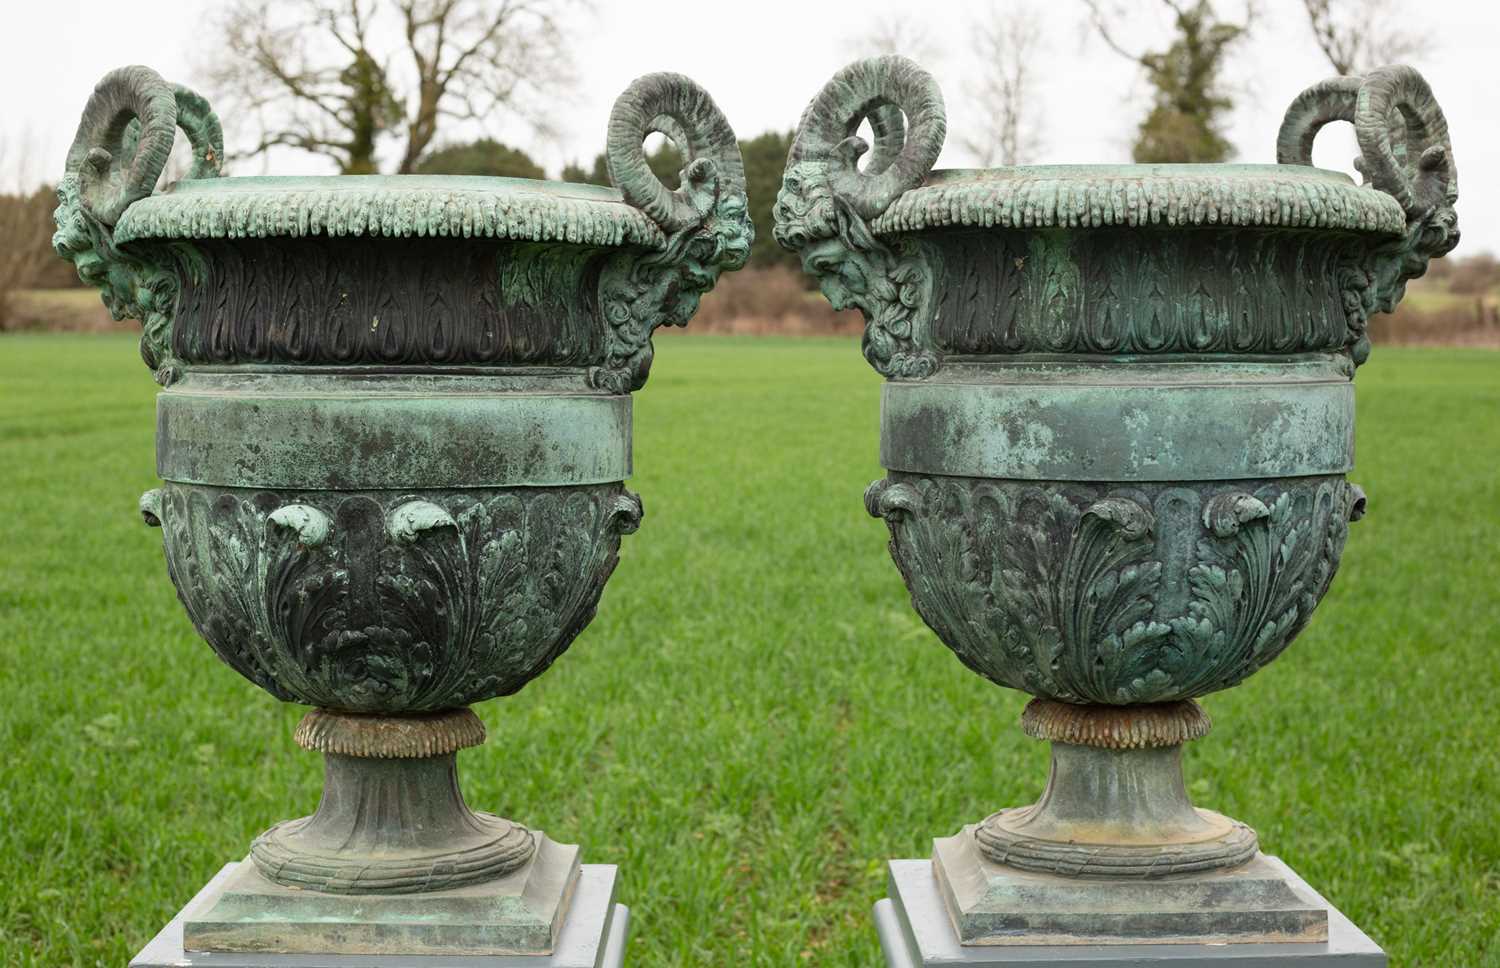 1137 - A pair of 18th or 19th century bronze urns designed by Claude Ballin